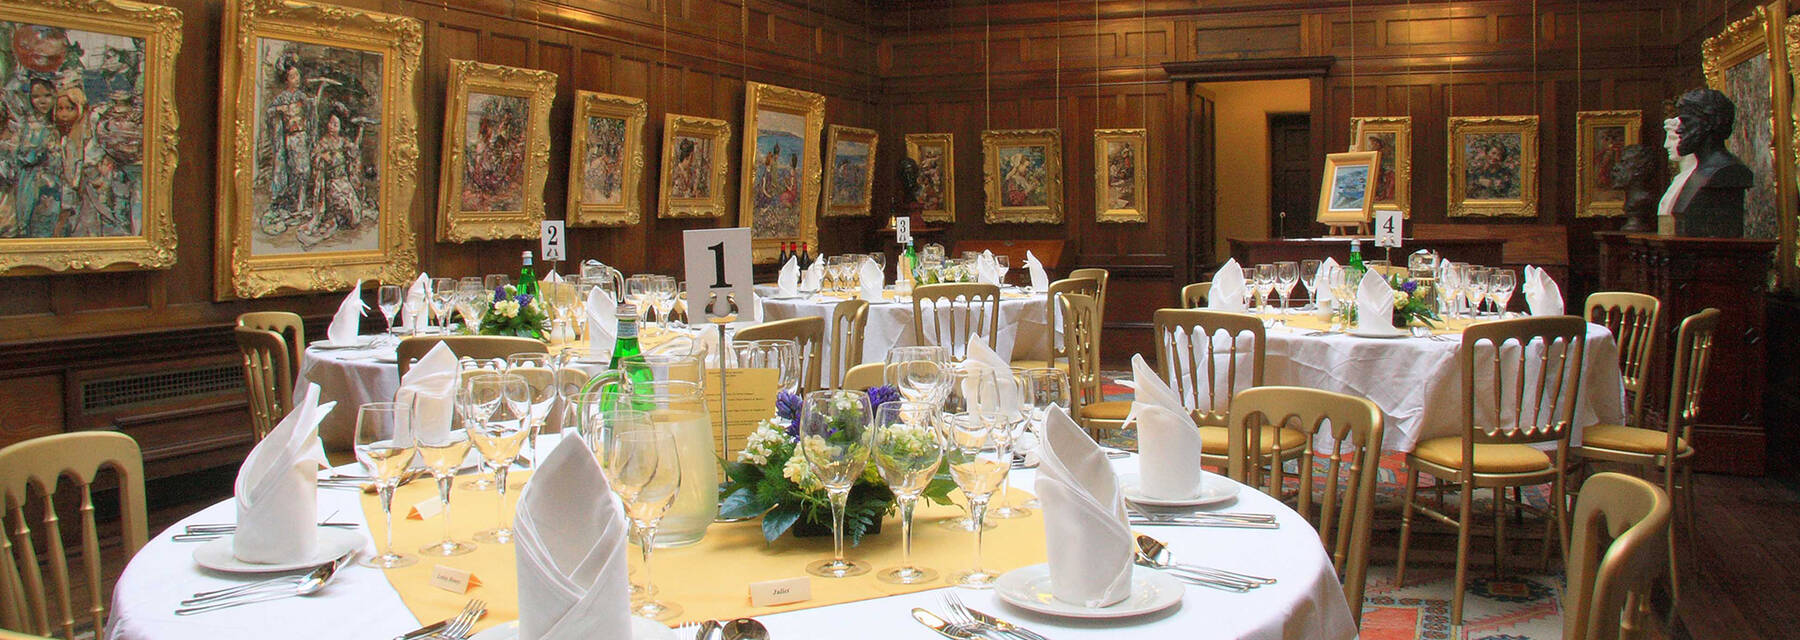 Broughton House gallery with round wedding dining tables arranged in the centre of the room